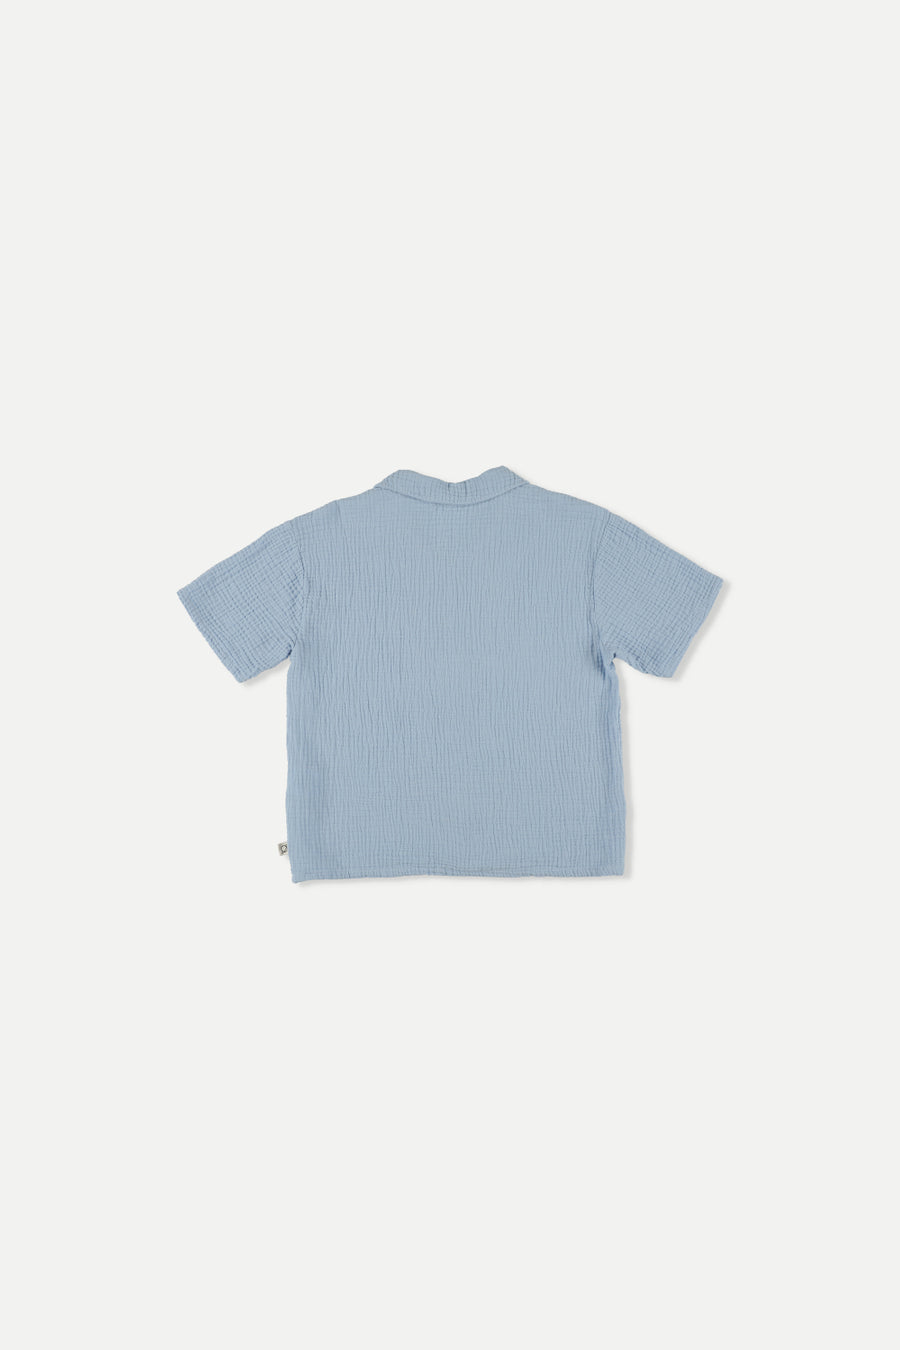 Pablo blue shirt by My Little Cozmo